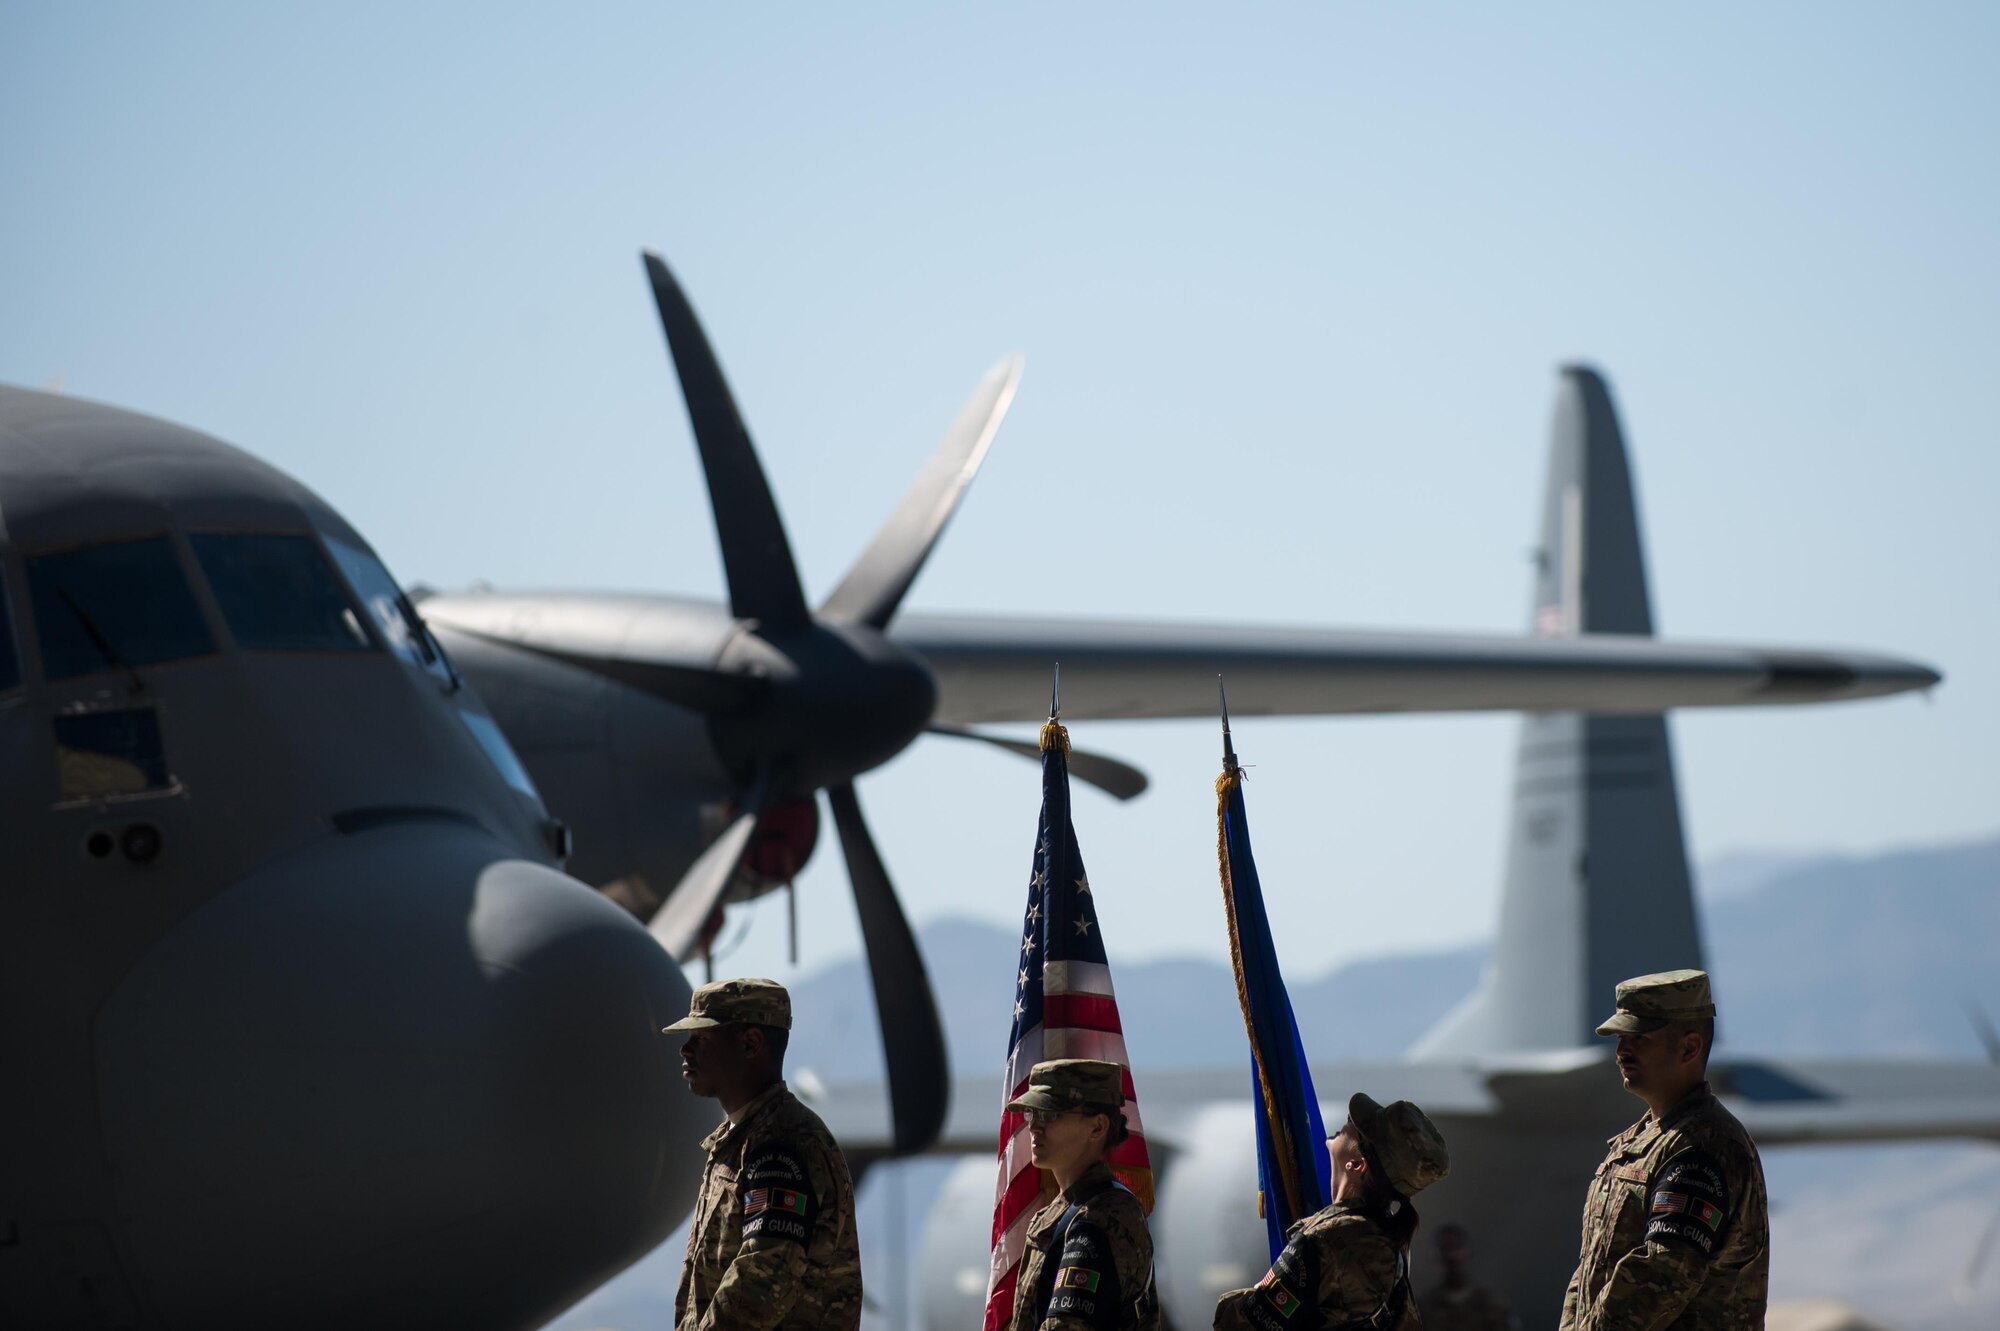 U.S. Airmen with the Bagram Airfield Honor Guard make last minute adjustments before the 455th Air Expeditionary Wing change of command ceremony at Bagram Airfield, Afghanistan, July 1, 2015. During the ceremony Kelly relinquished command of the 455th AEW to Brig. Gen. Dave Julazadeh.  (U.S. Air Force photo by Tech. Sgt. Joseph Swafford/Released)